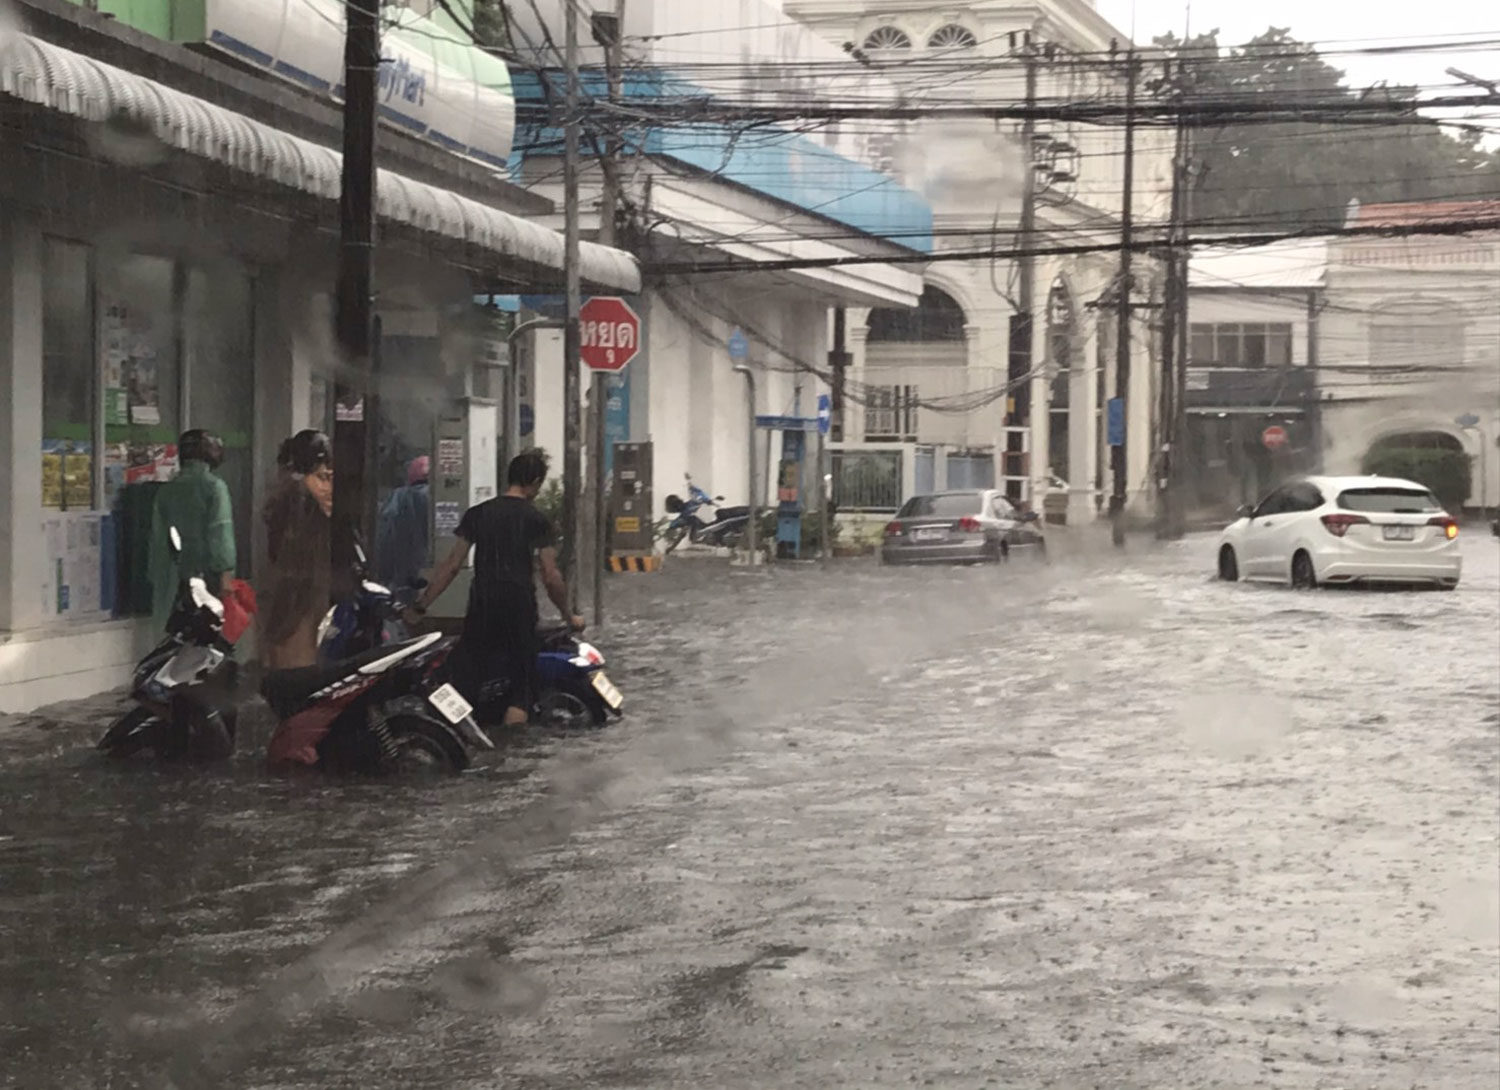 Motorcyclists take refuge in front of a convenience store on a flooded road.